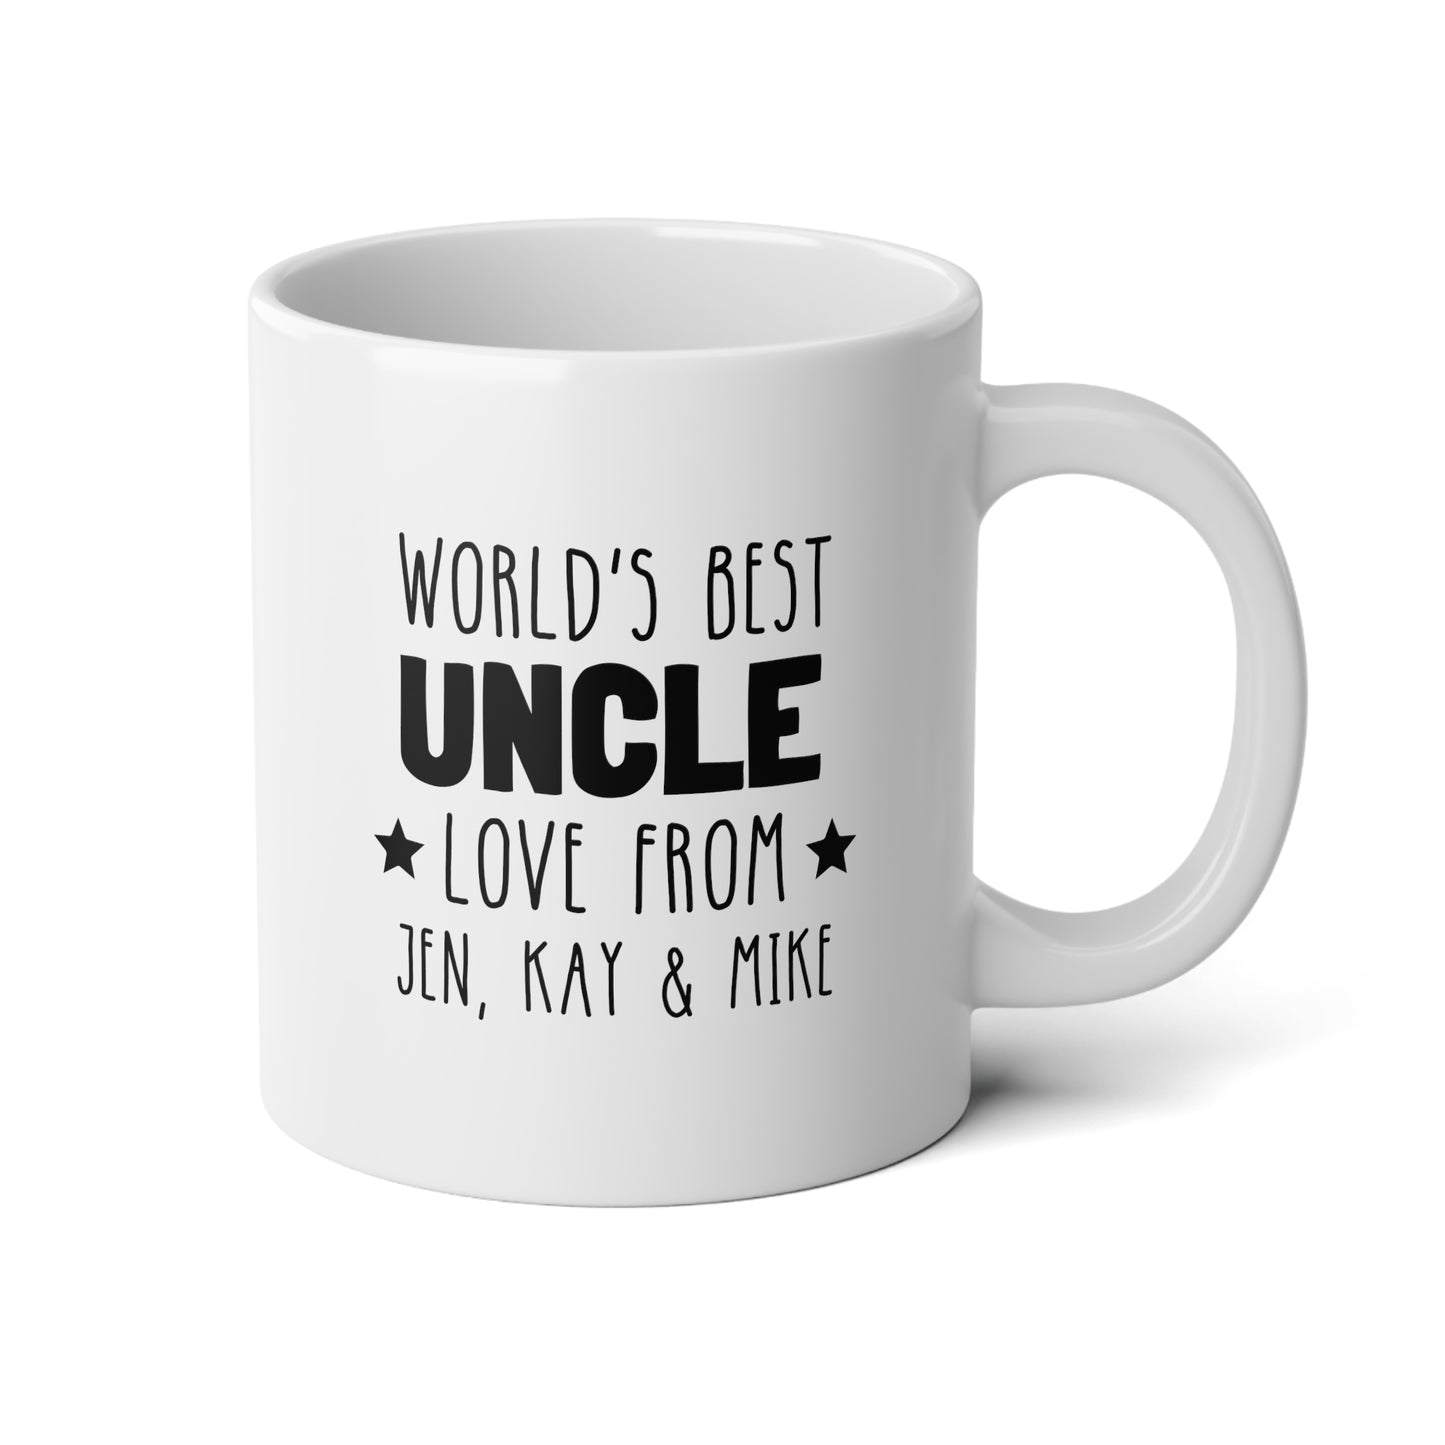 Personalized World's Best Uncle 20oz white funny large coffee mug gift for fun uncle funcle love from nephew niece custom names waveywares wavey wares wavywares wavy wares